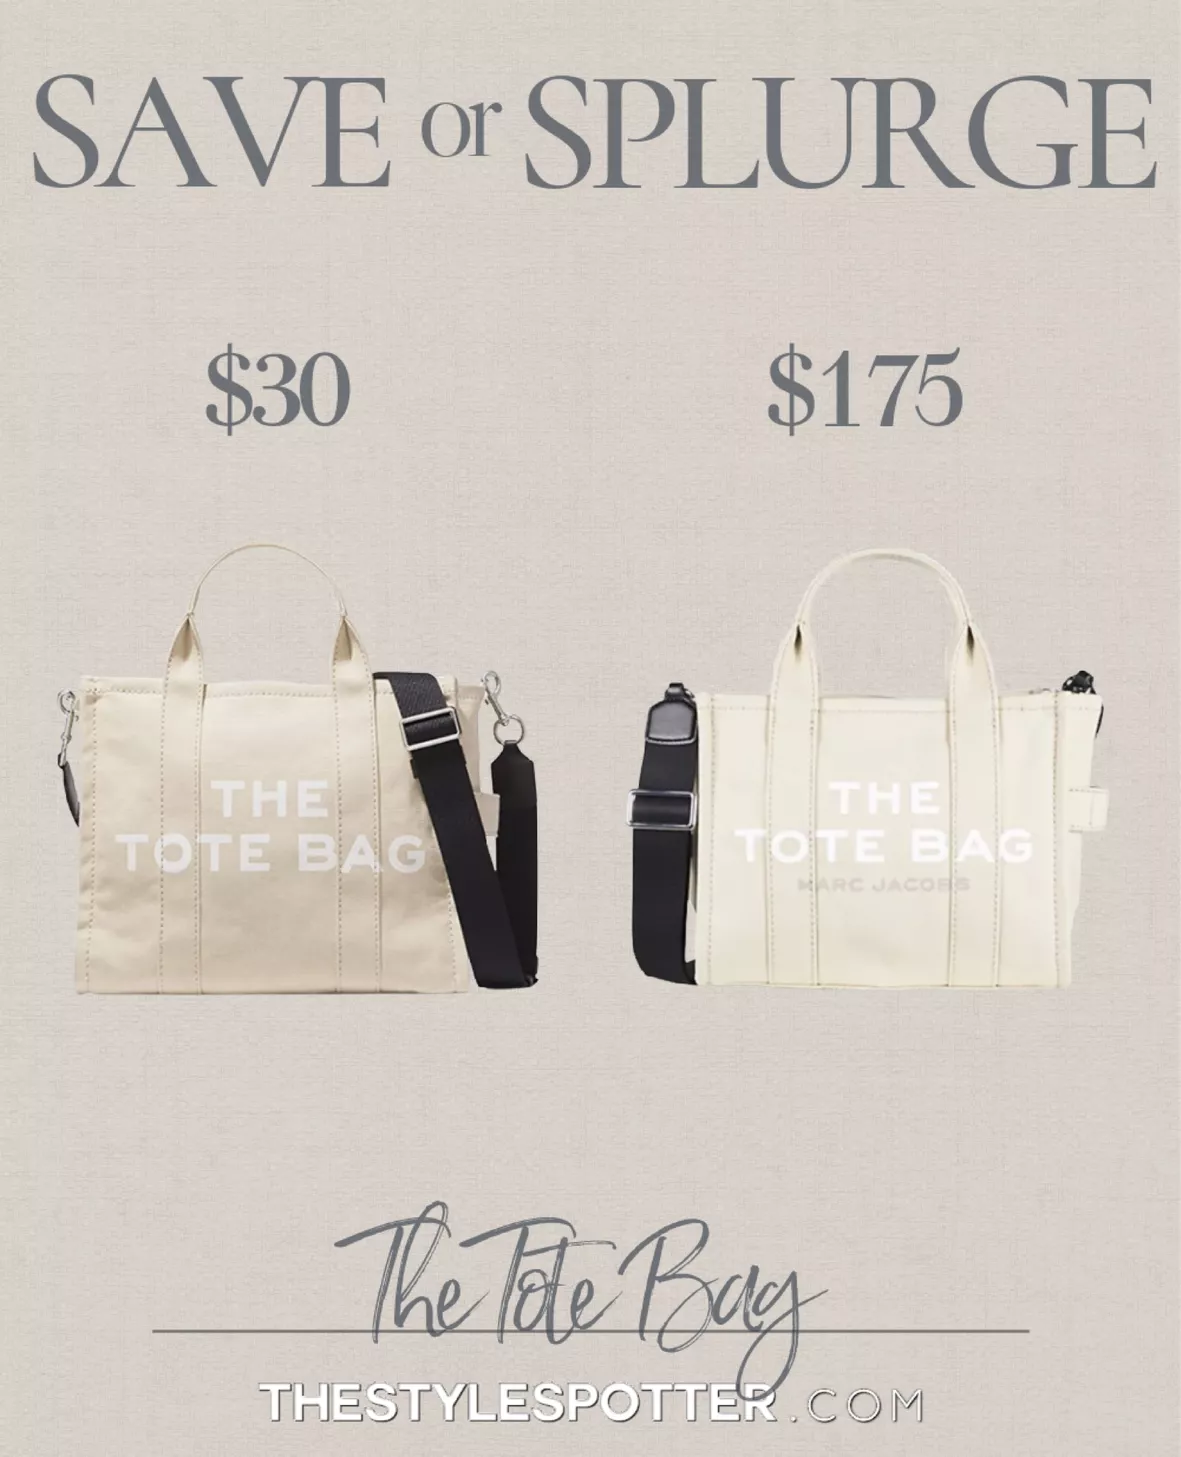 Marc Jacobs Women's The Small Tote curated on LTK